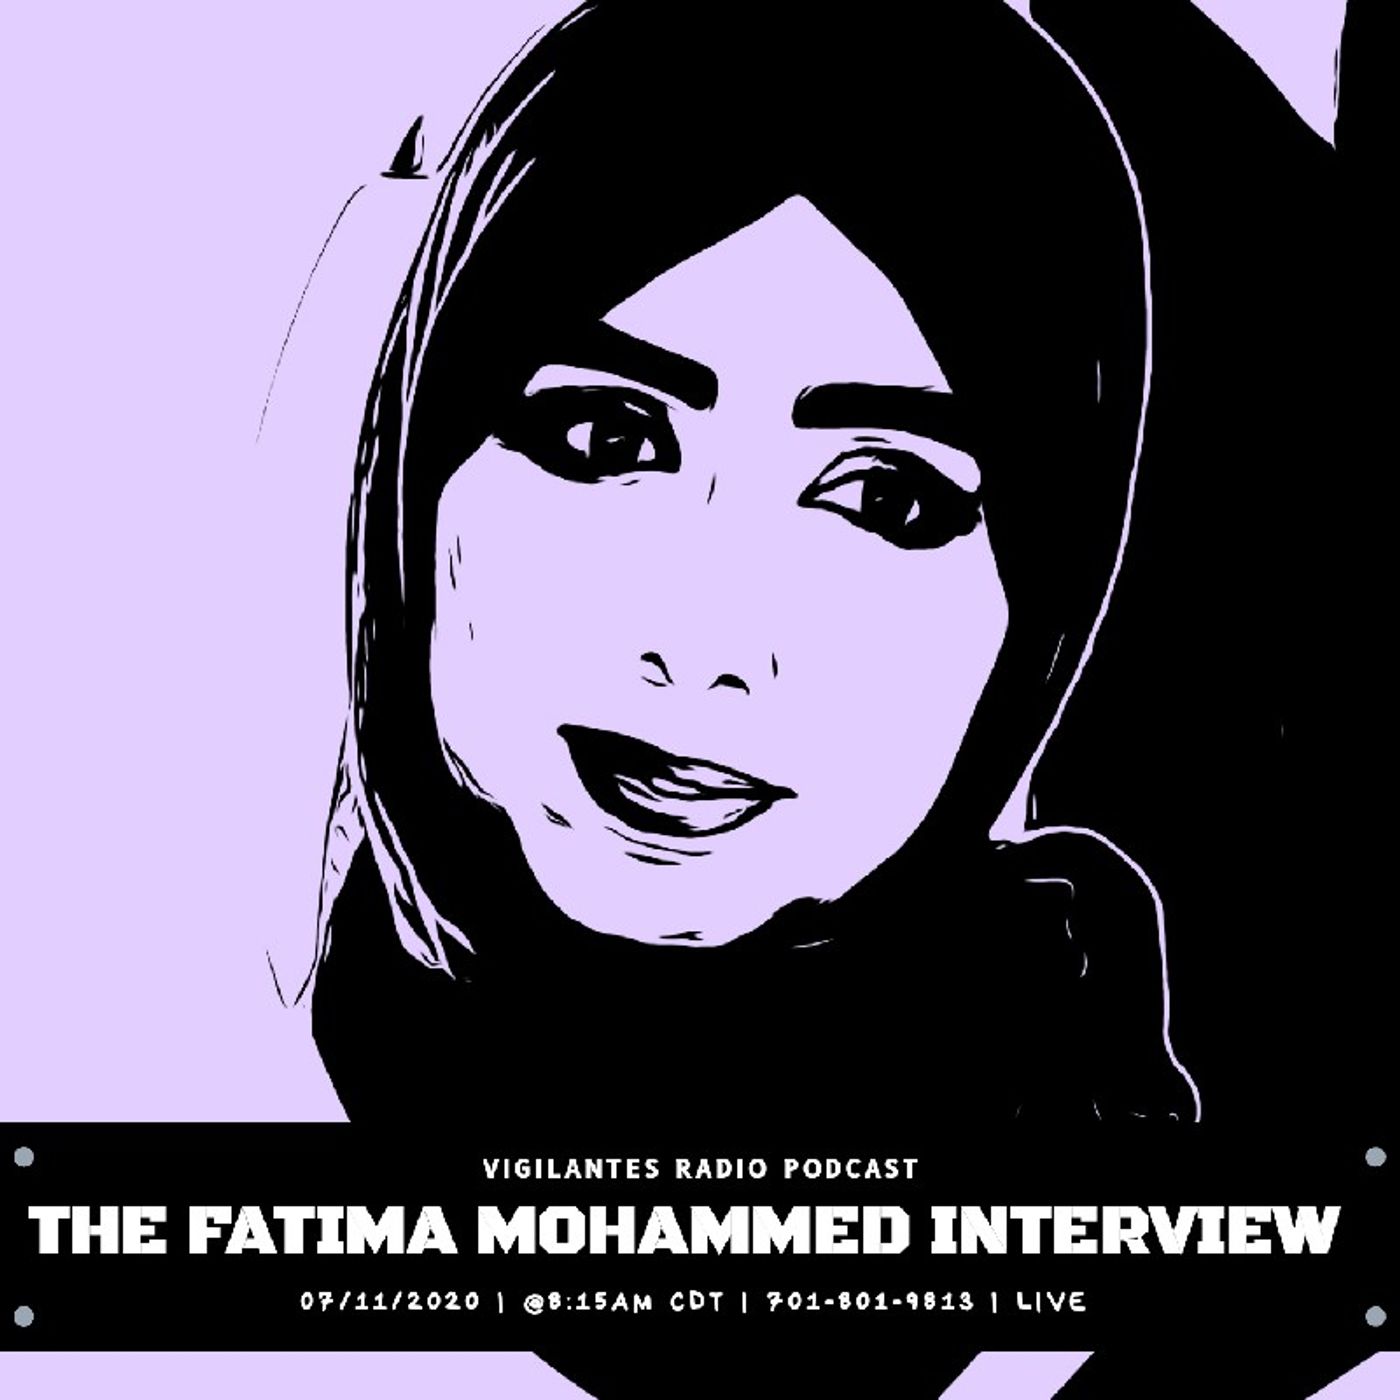 The Fatima Mohammed Interview. Image